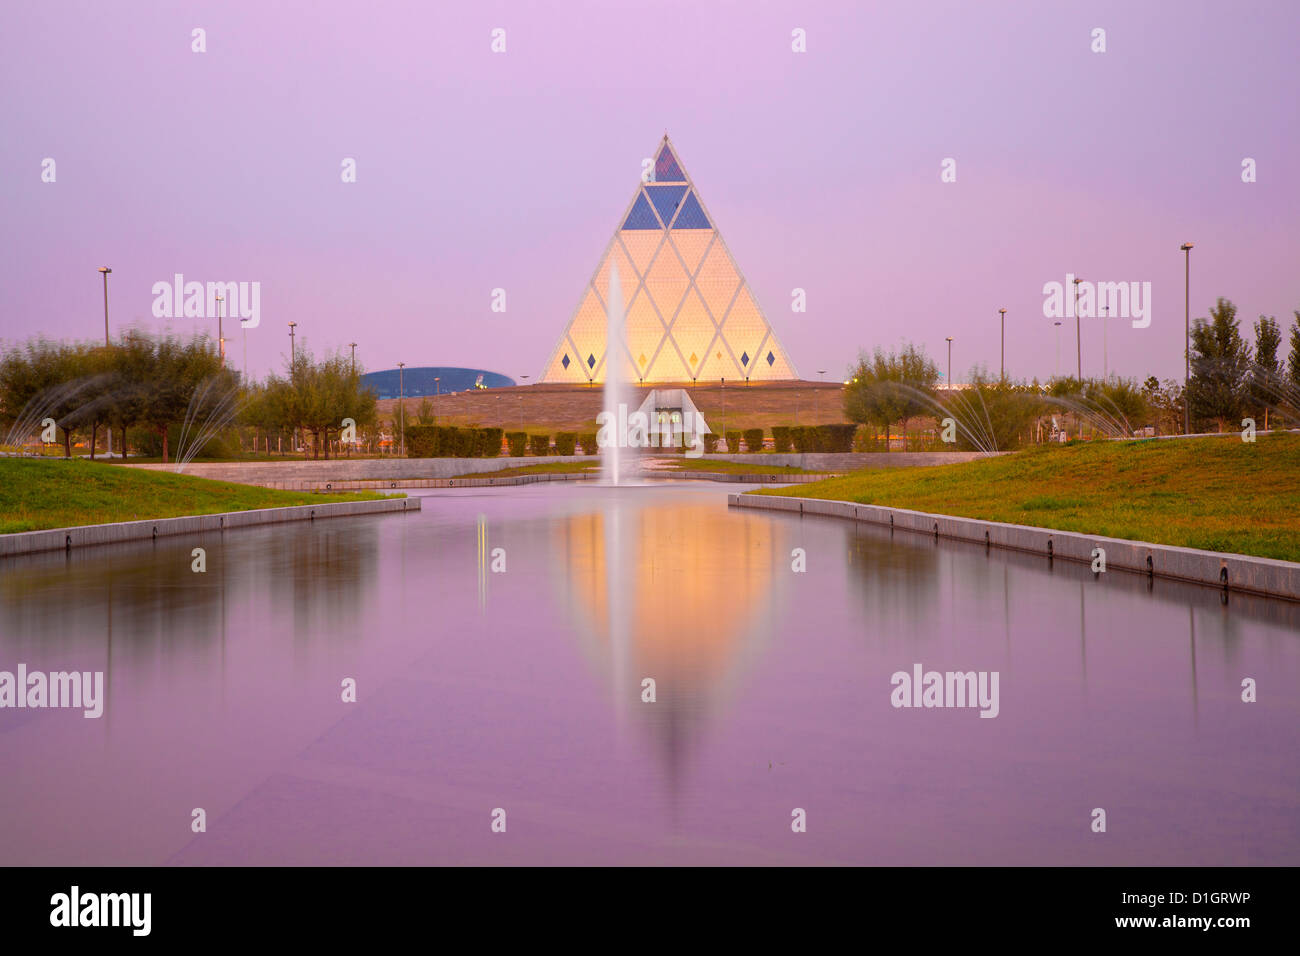 Palace of Peace and Reconciliation pyramid designed by Sir Norman Foster, Astana, Kazakhstan, Central Asia, Asia Stock Photo